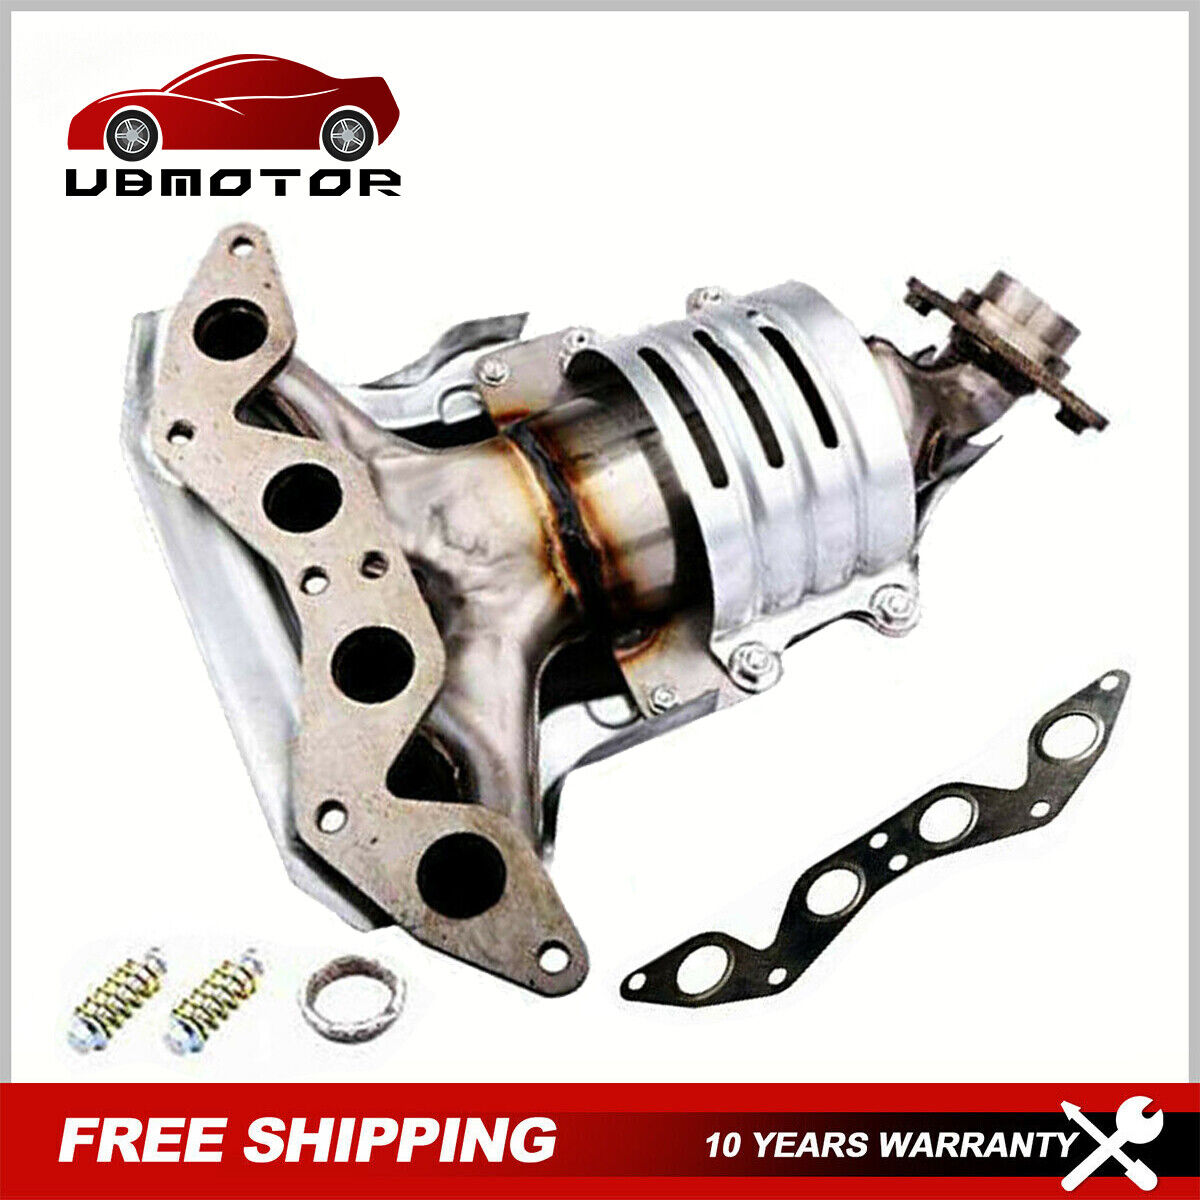 Exhaust Manifold W/ Catalytic Converter Header For 01-05 Honda Civic 4 cyl 1.7L